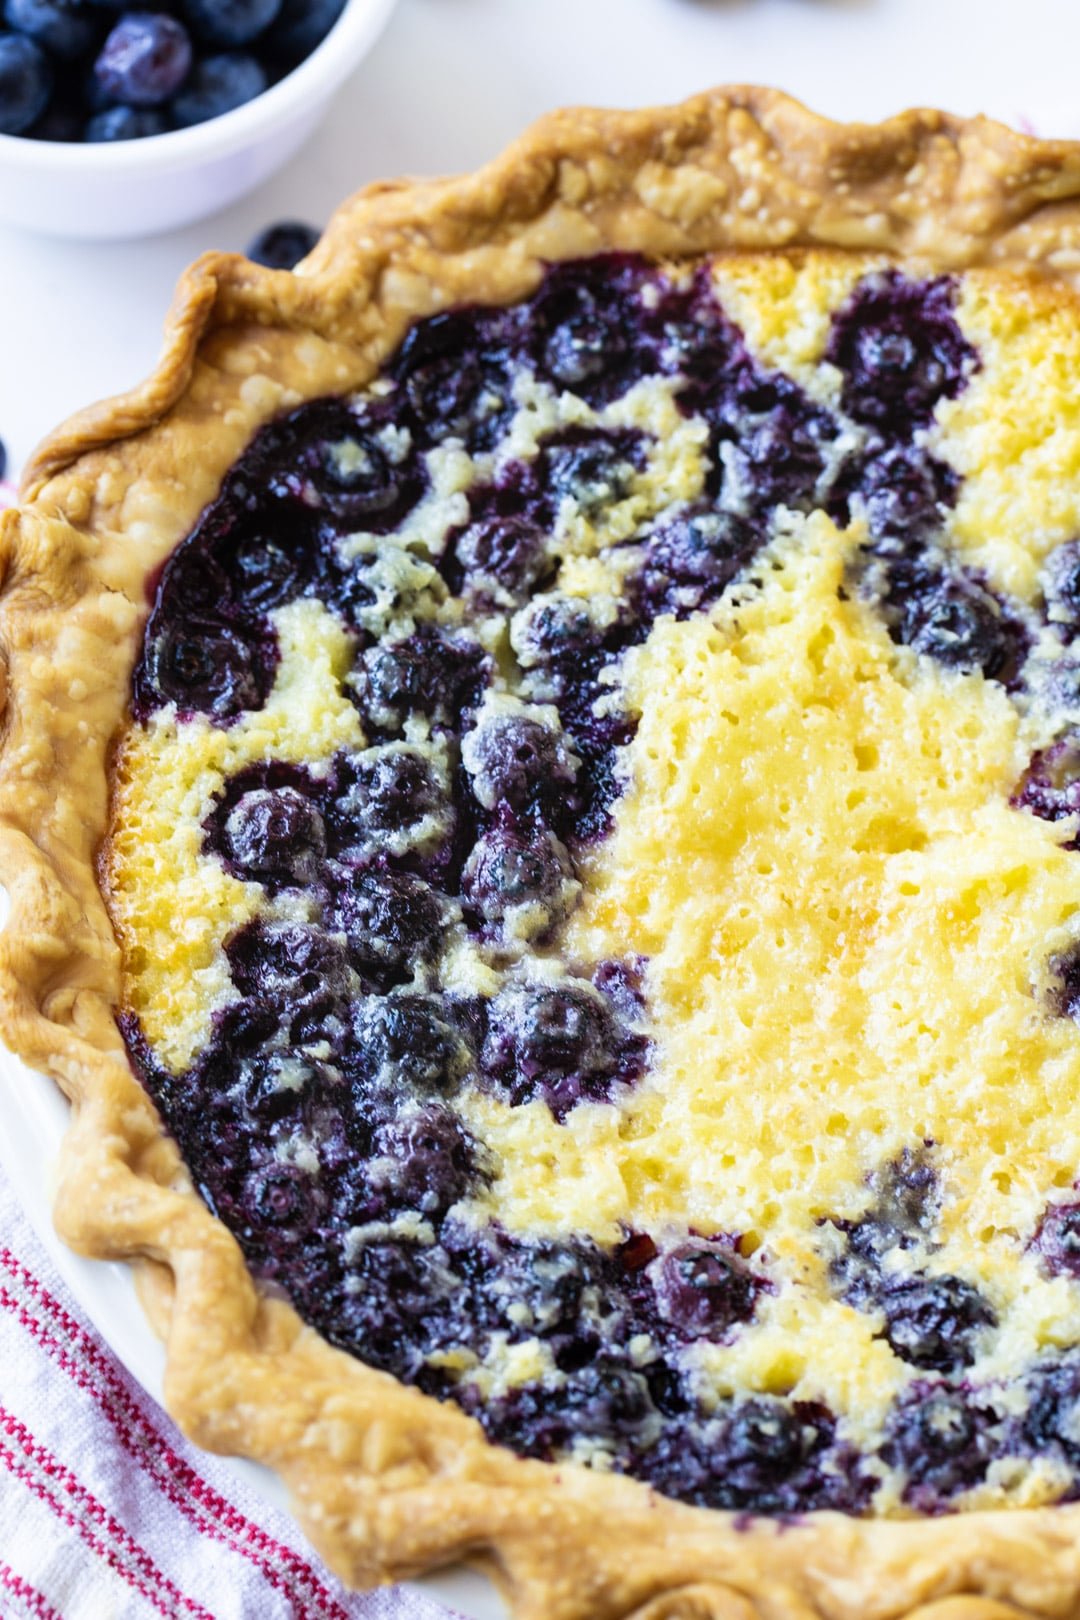 Close-up of pie with blueberries.